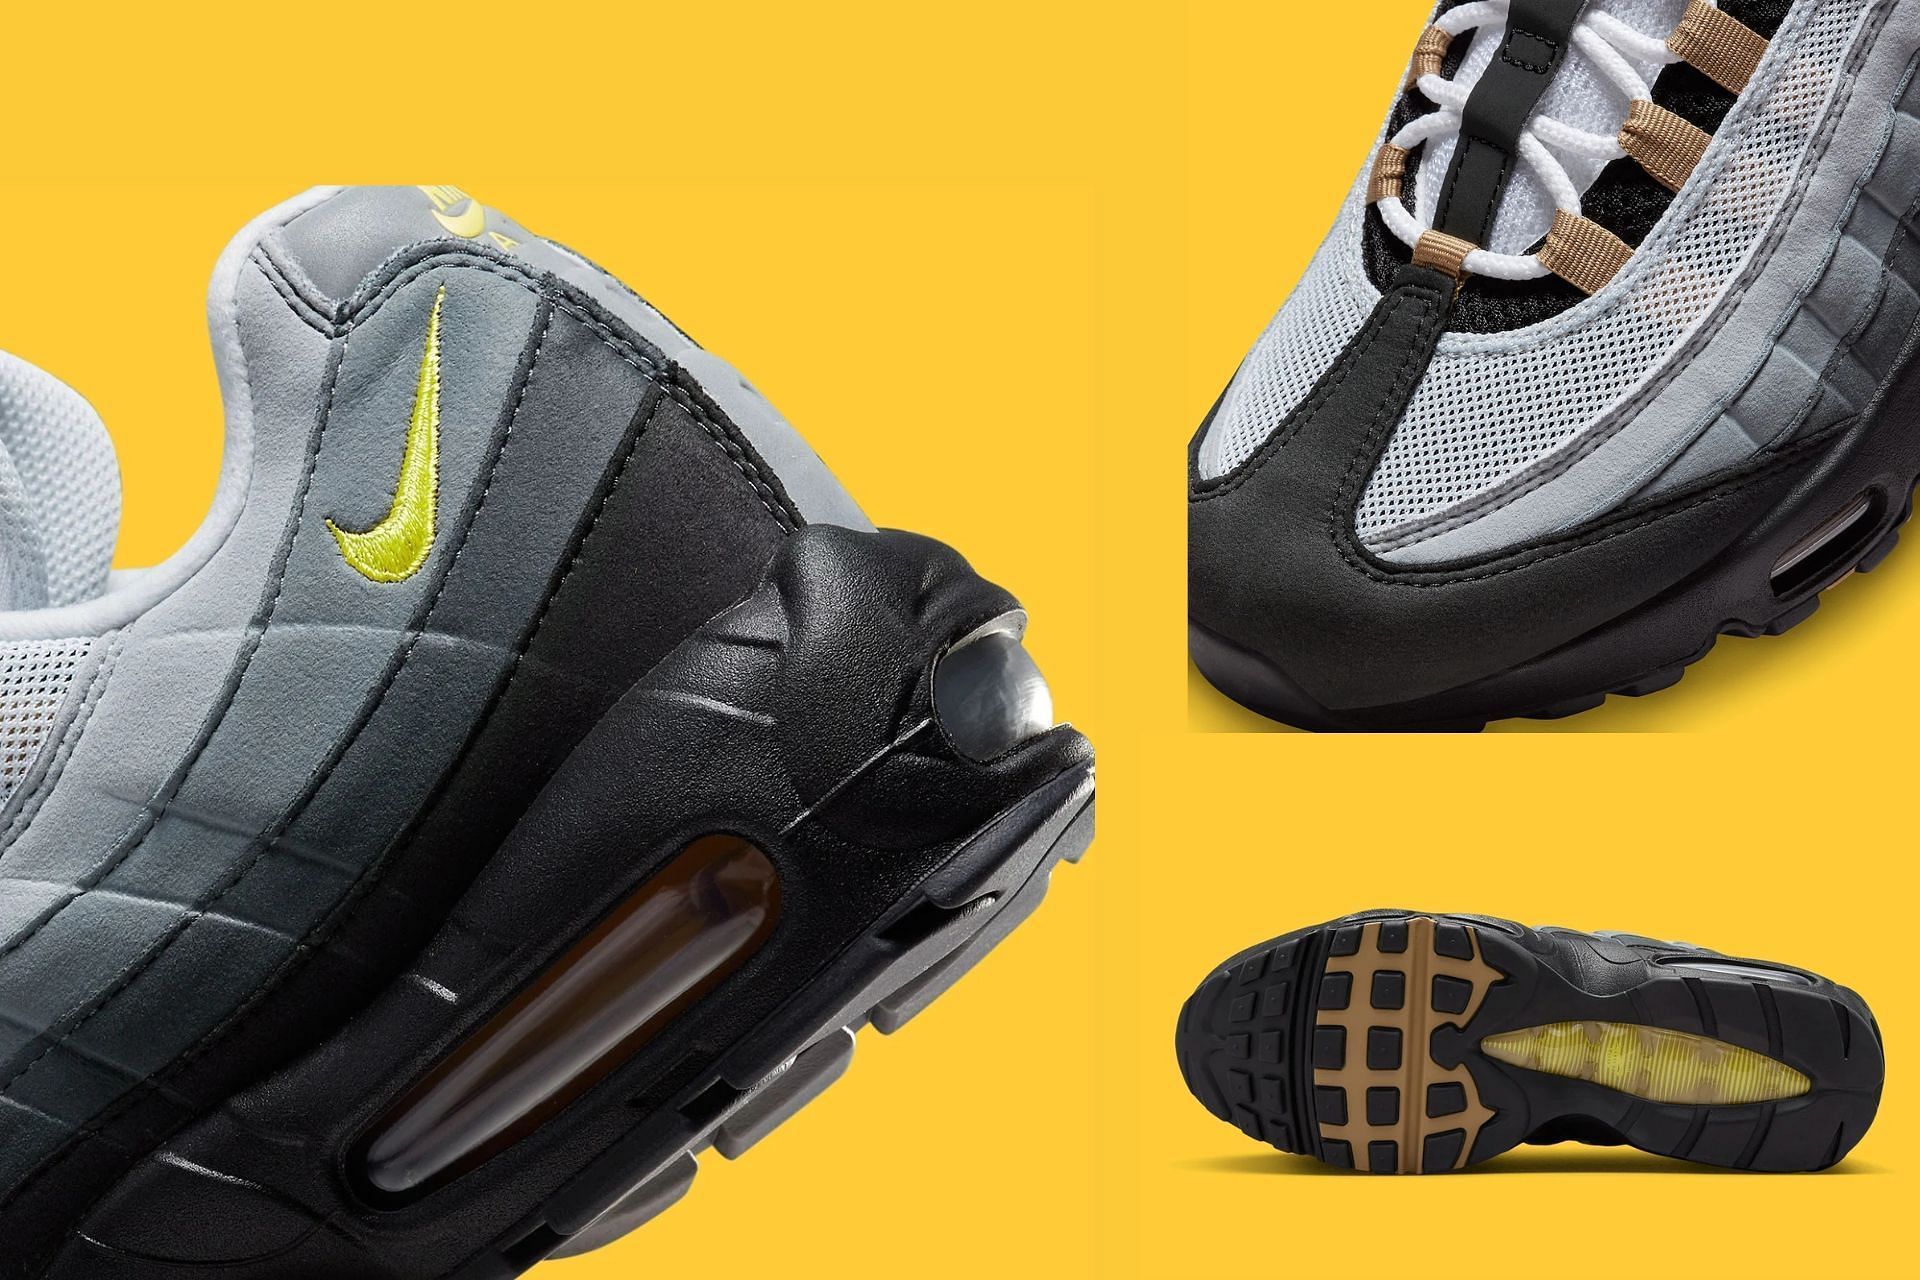 Air Max 95: Nike Air Max 95 “Icons” shoes: Where to buy, price 